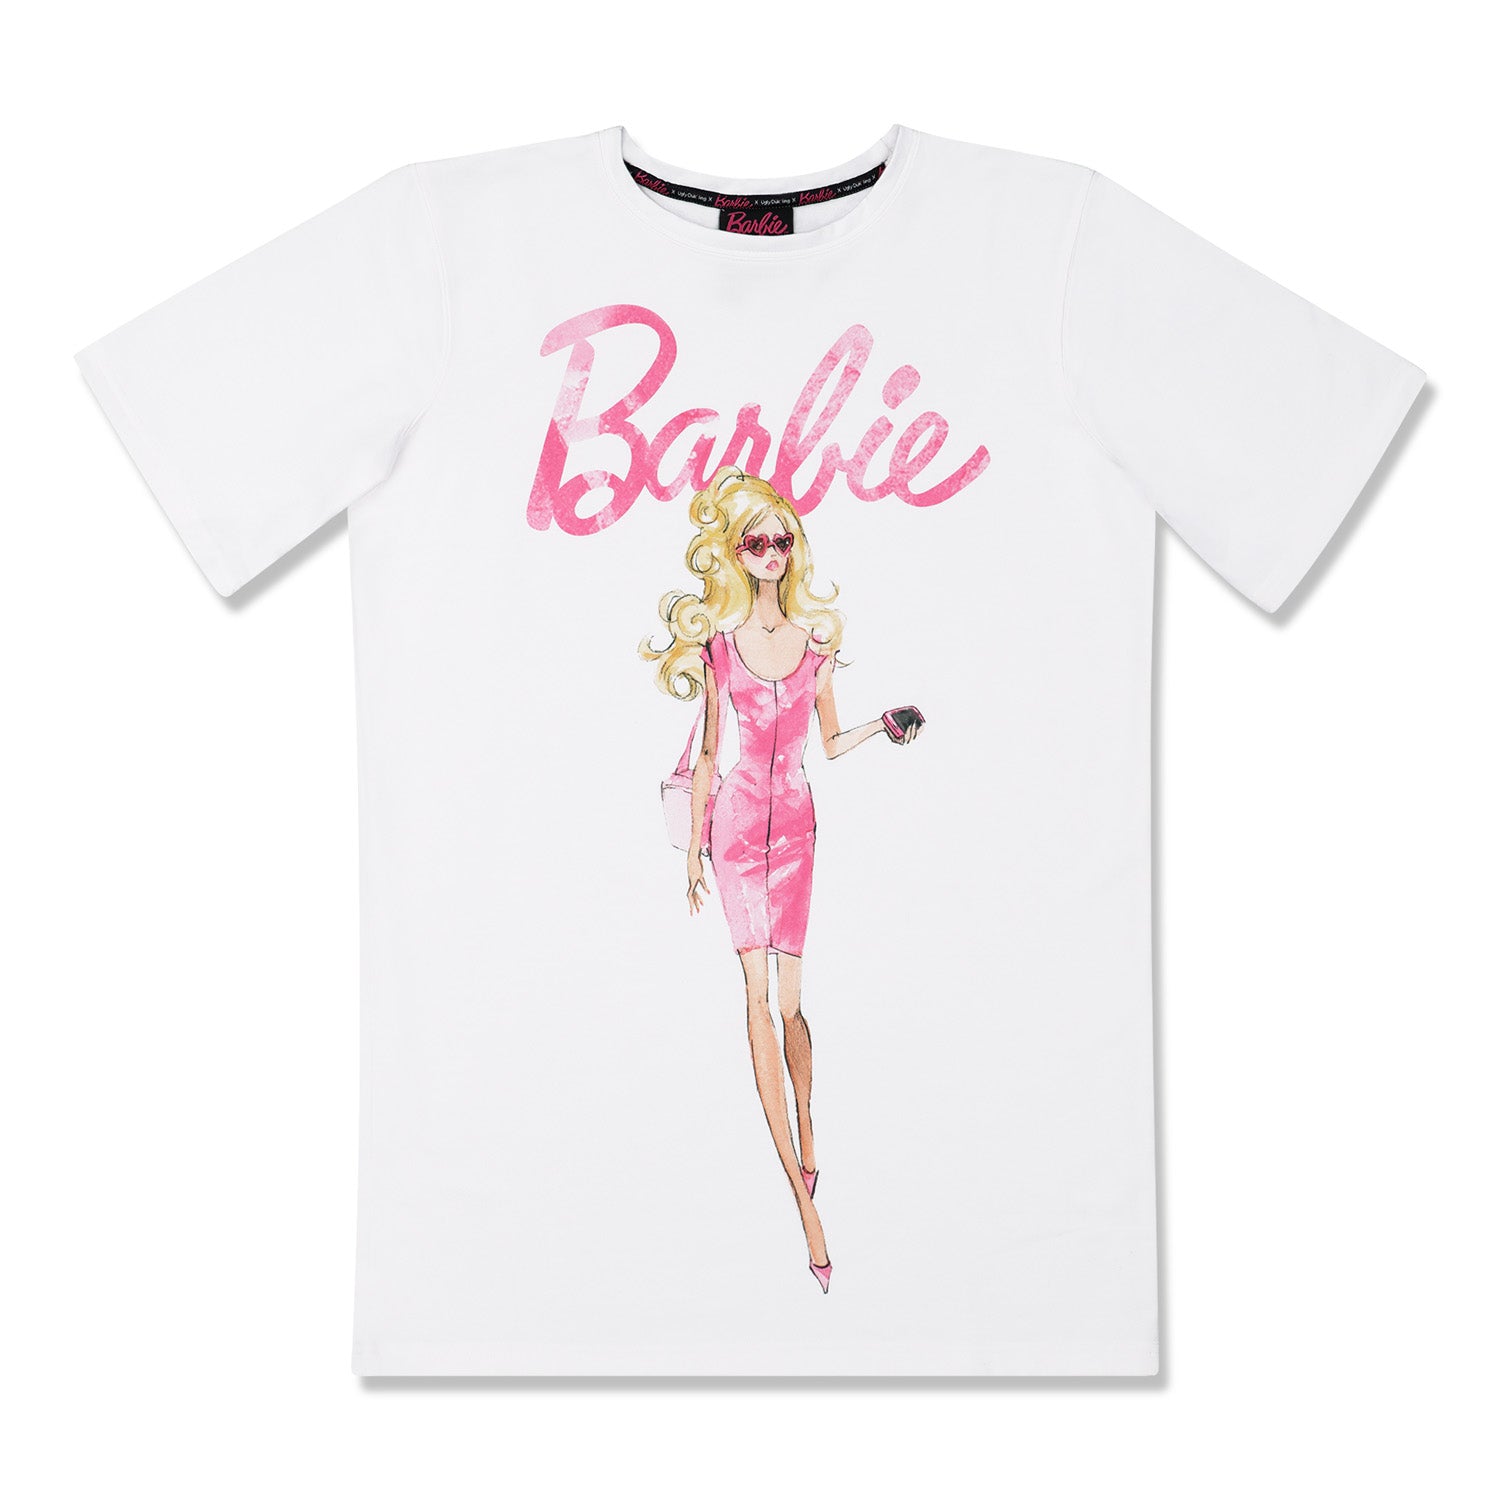 Pink Moschino T-shirt Dress for Barbie and Fashion Royalty and 